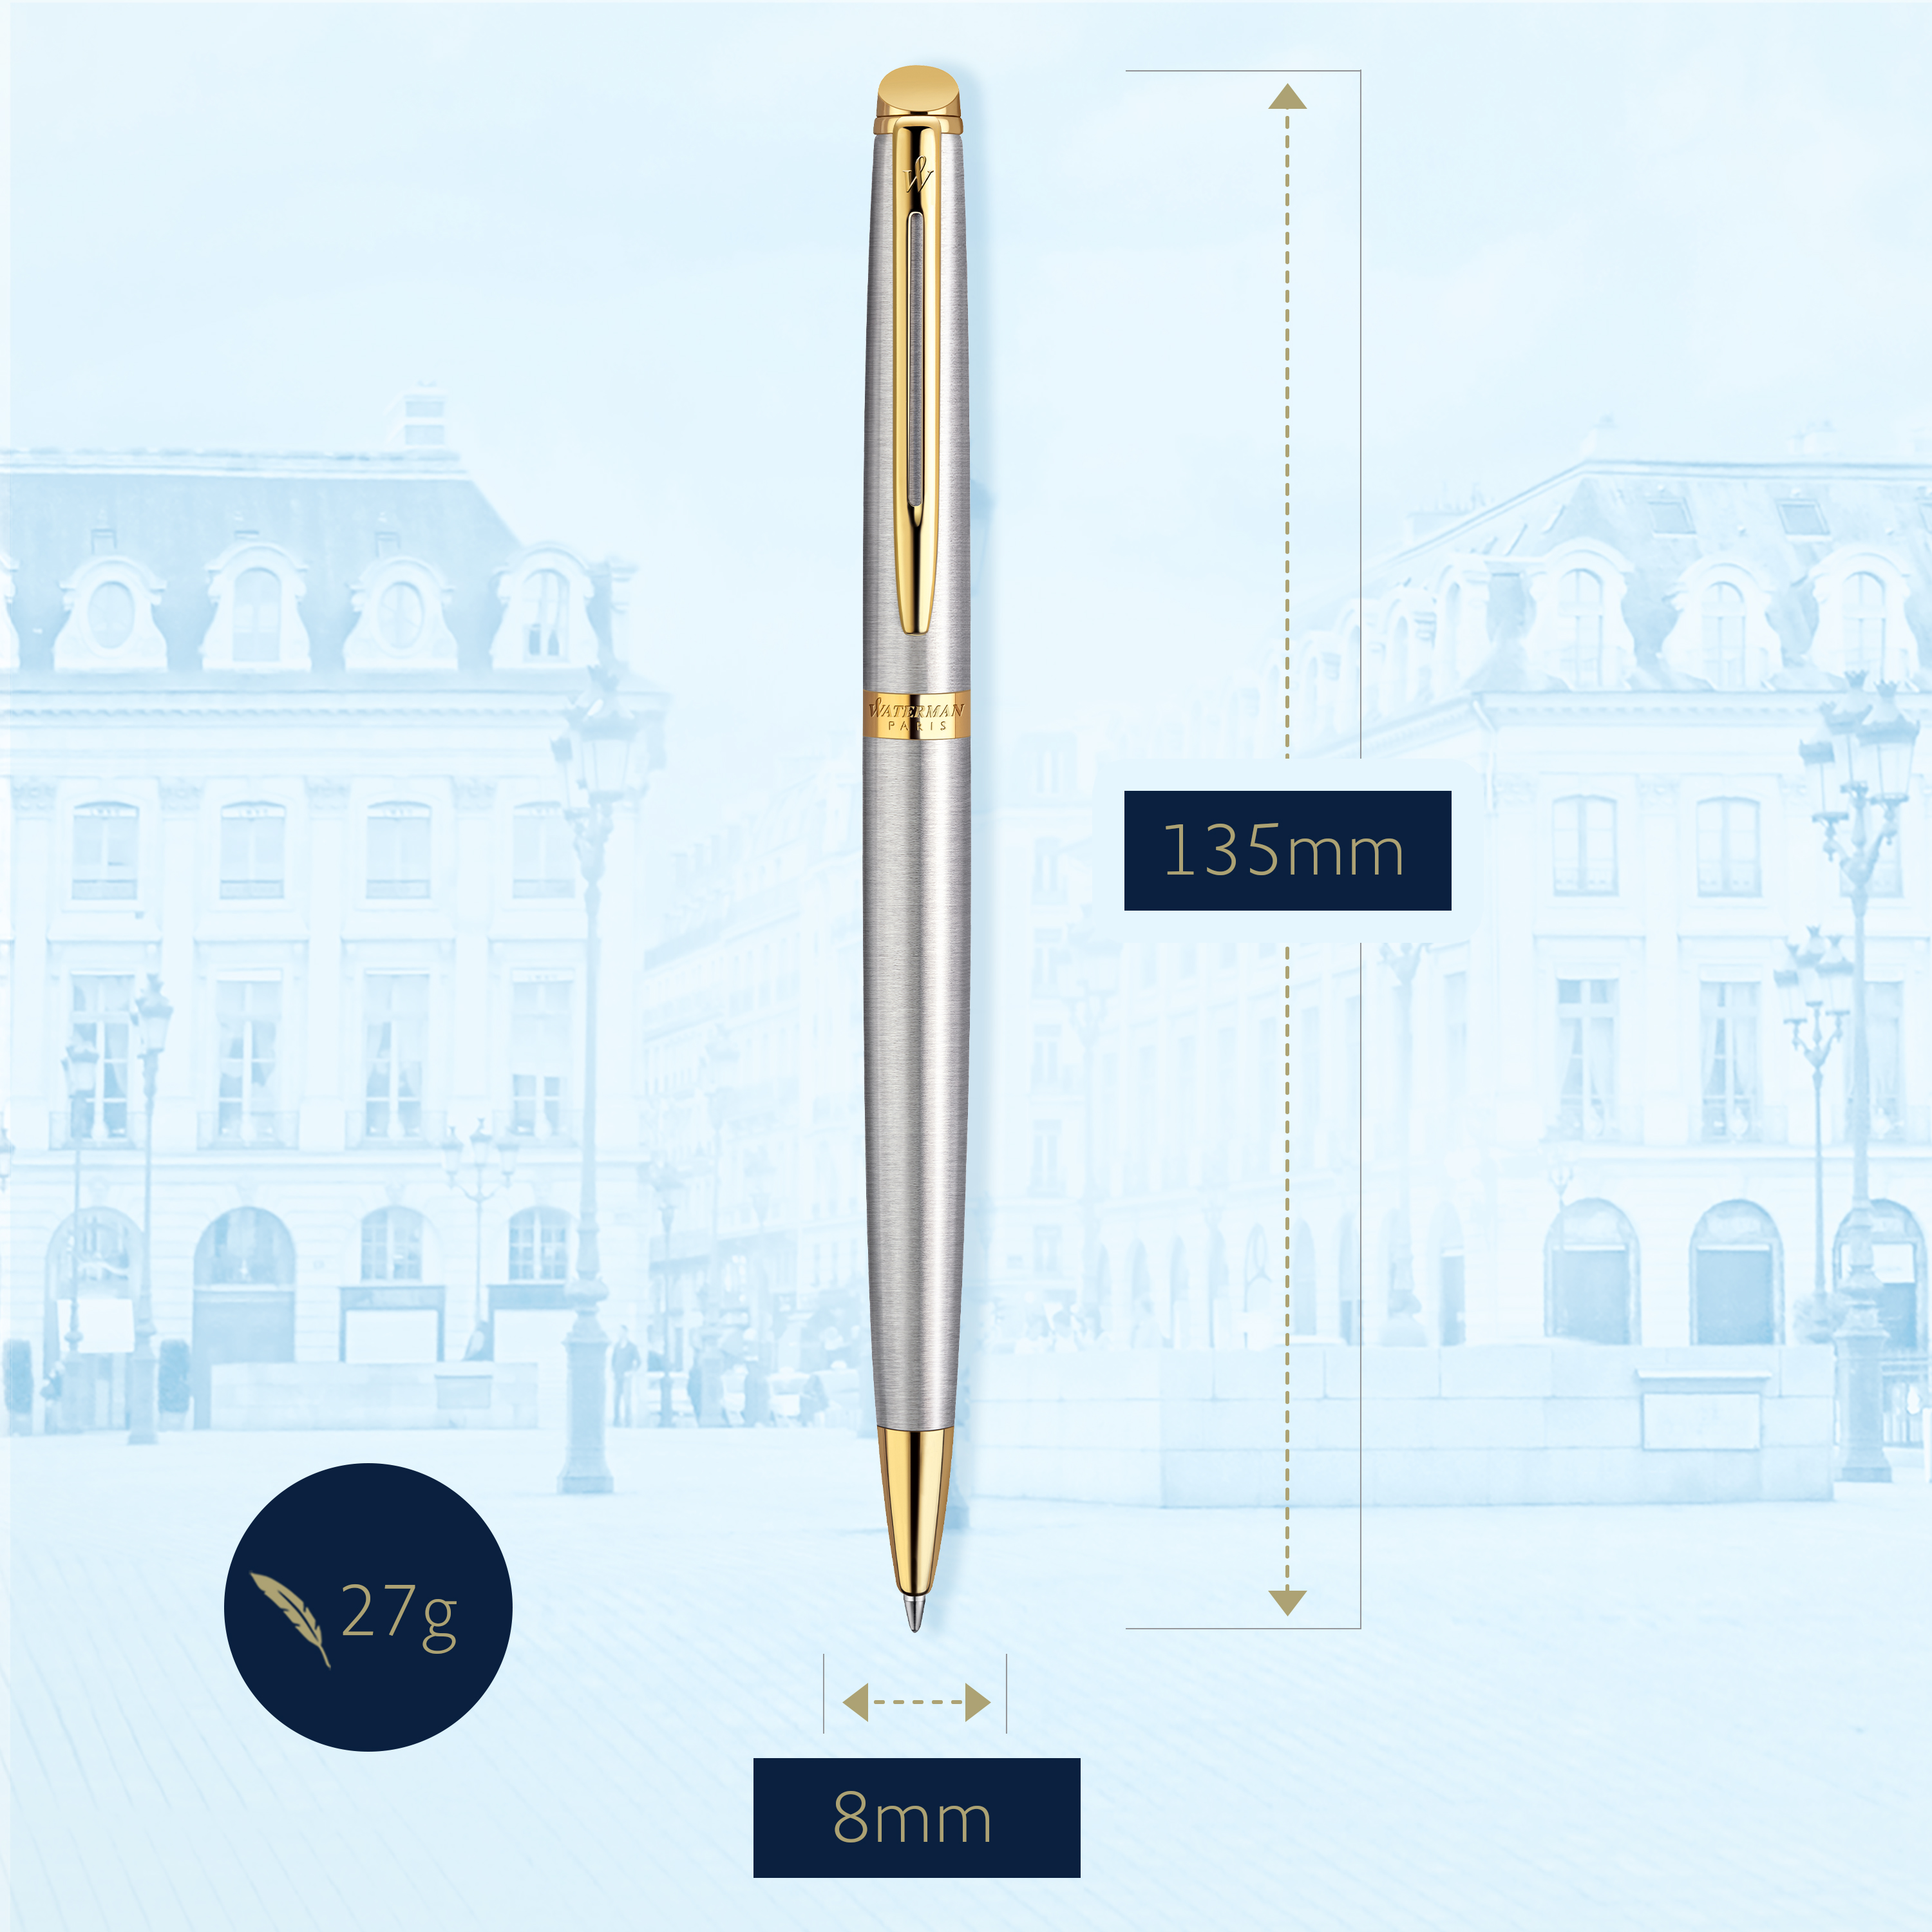 Waterman Hemisphere Stainless Steel Gold Trim Ballpoint - Pencraft the boutique